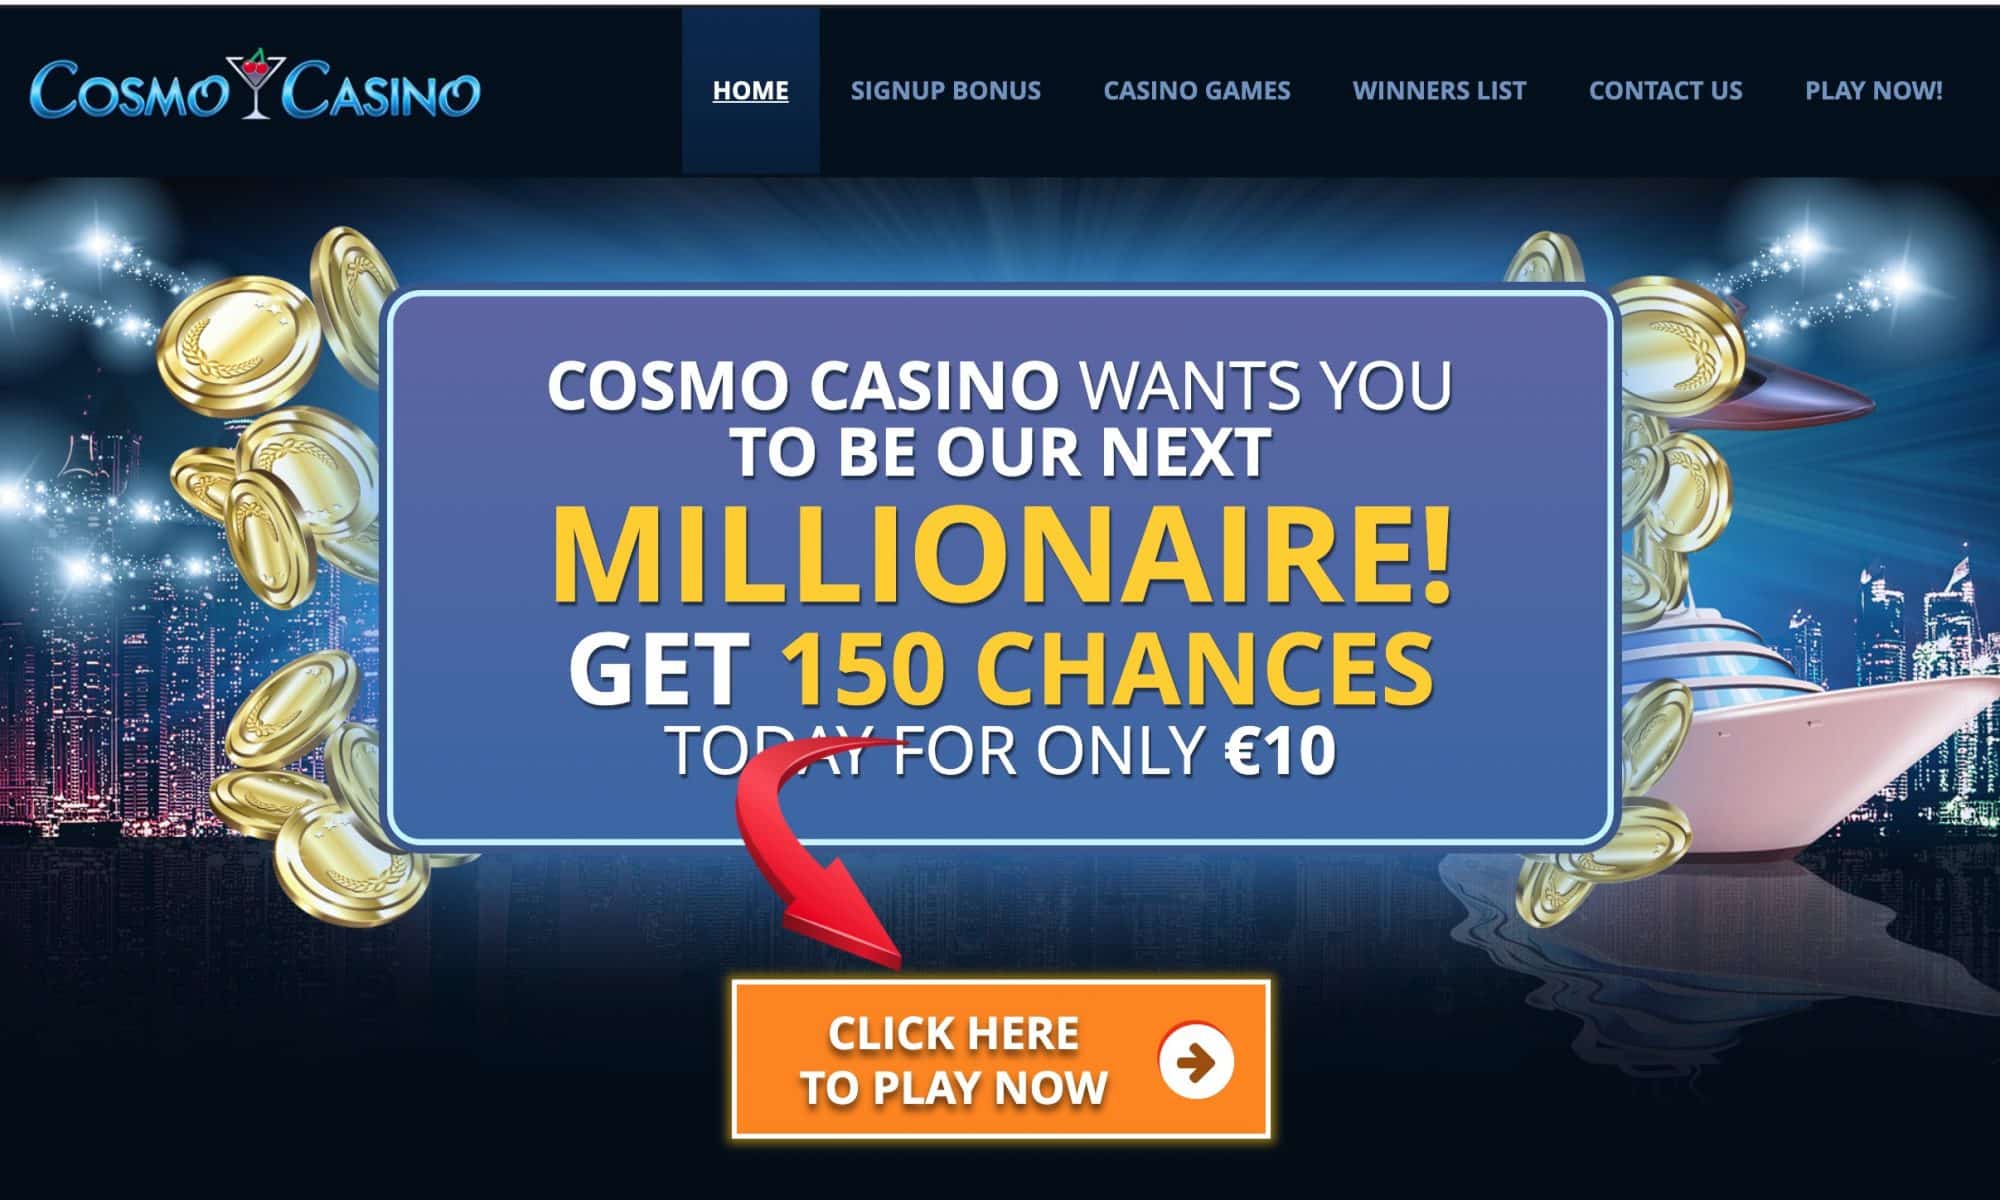 Cosmo Casino: welcome reward 150 chances to be a millionaire